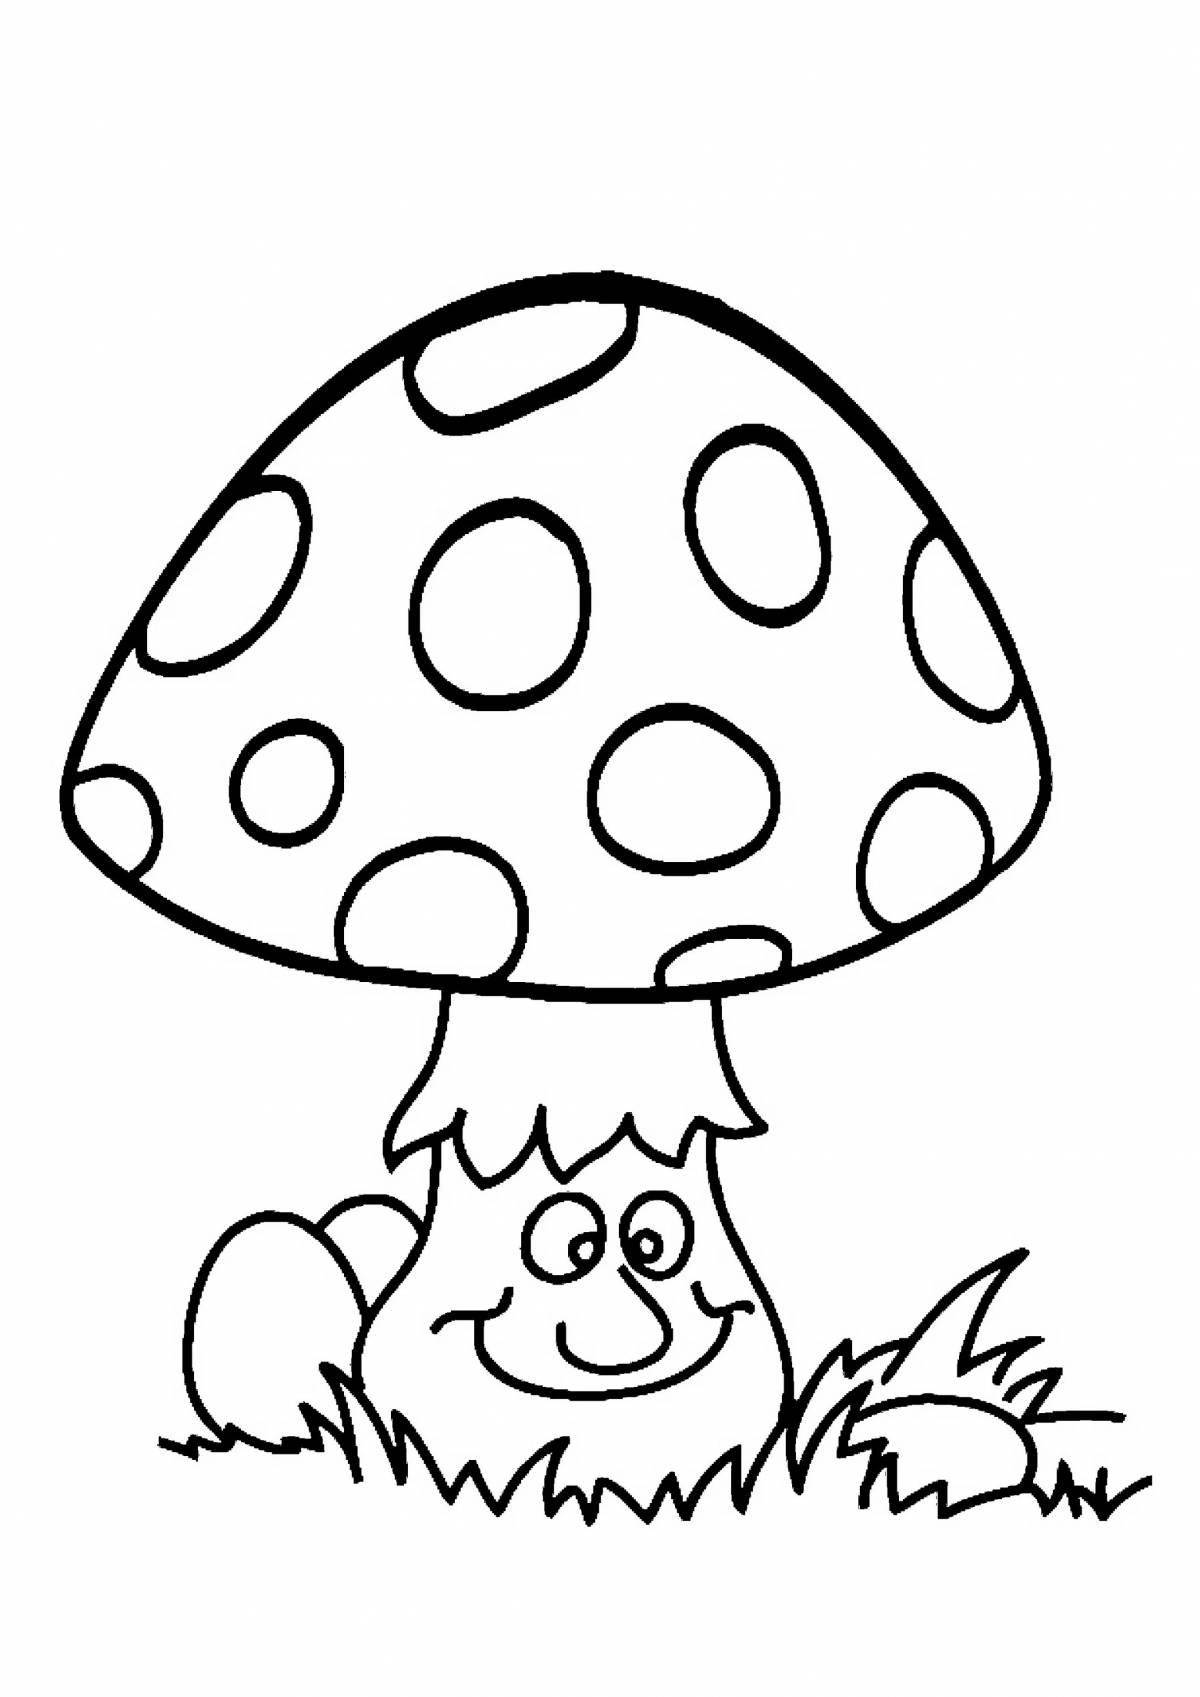 Colouring colorful mushroom fly agaric